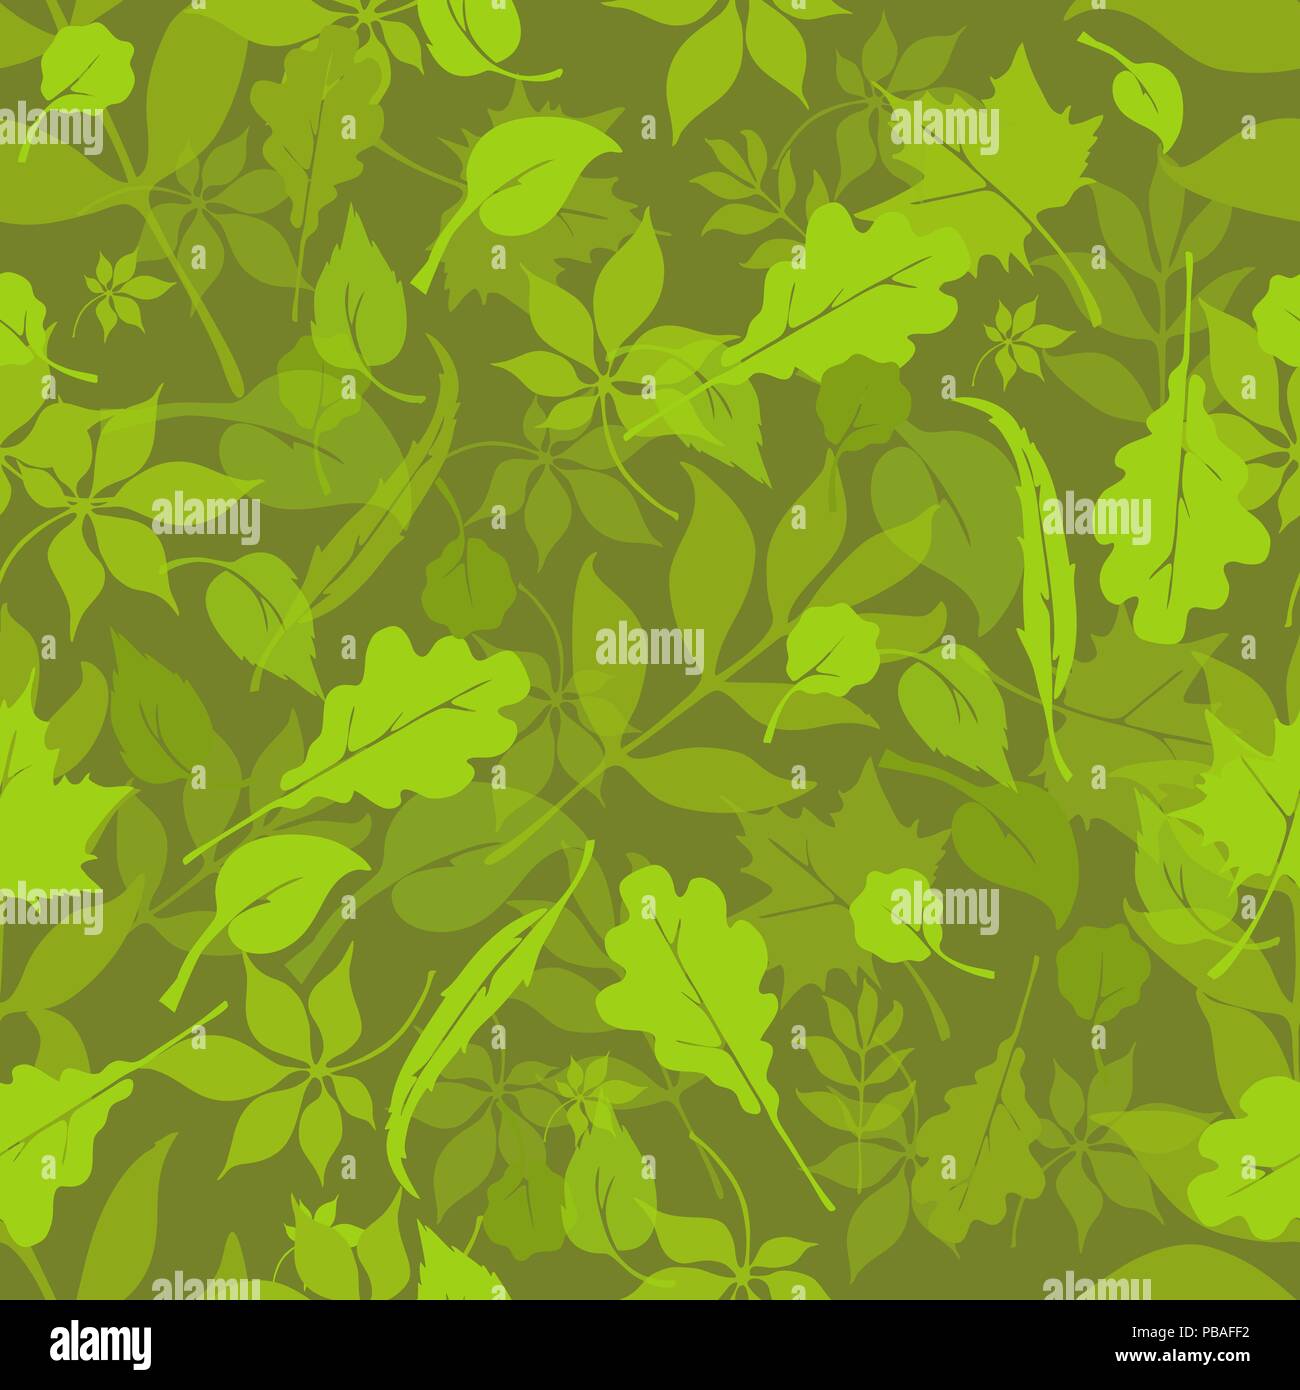 Russian forest seamless pattern. Camouflage fabric. Square format. Leaves texture. European trees design. . Oak, linden, birch, chestnut, willow, alde Stock Vector